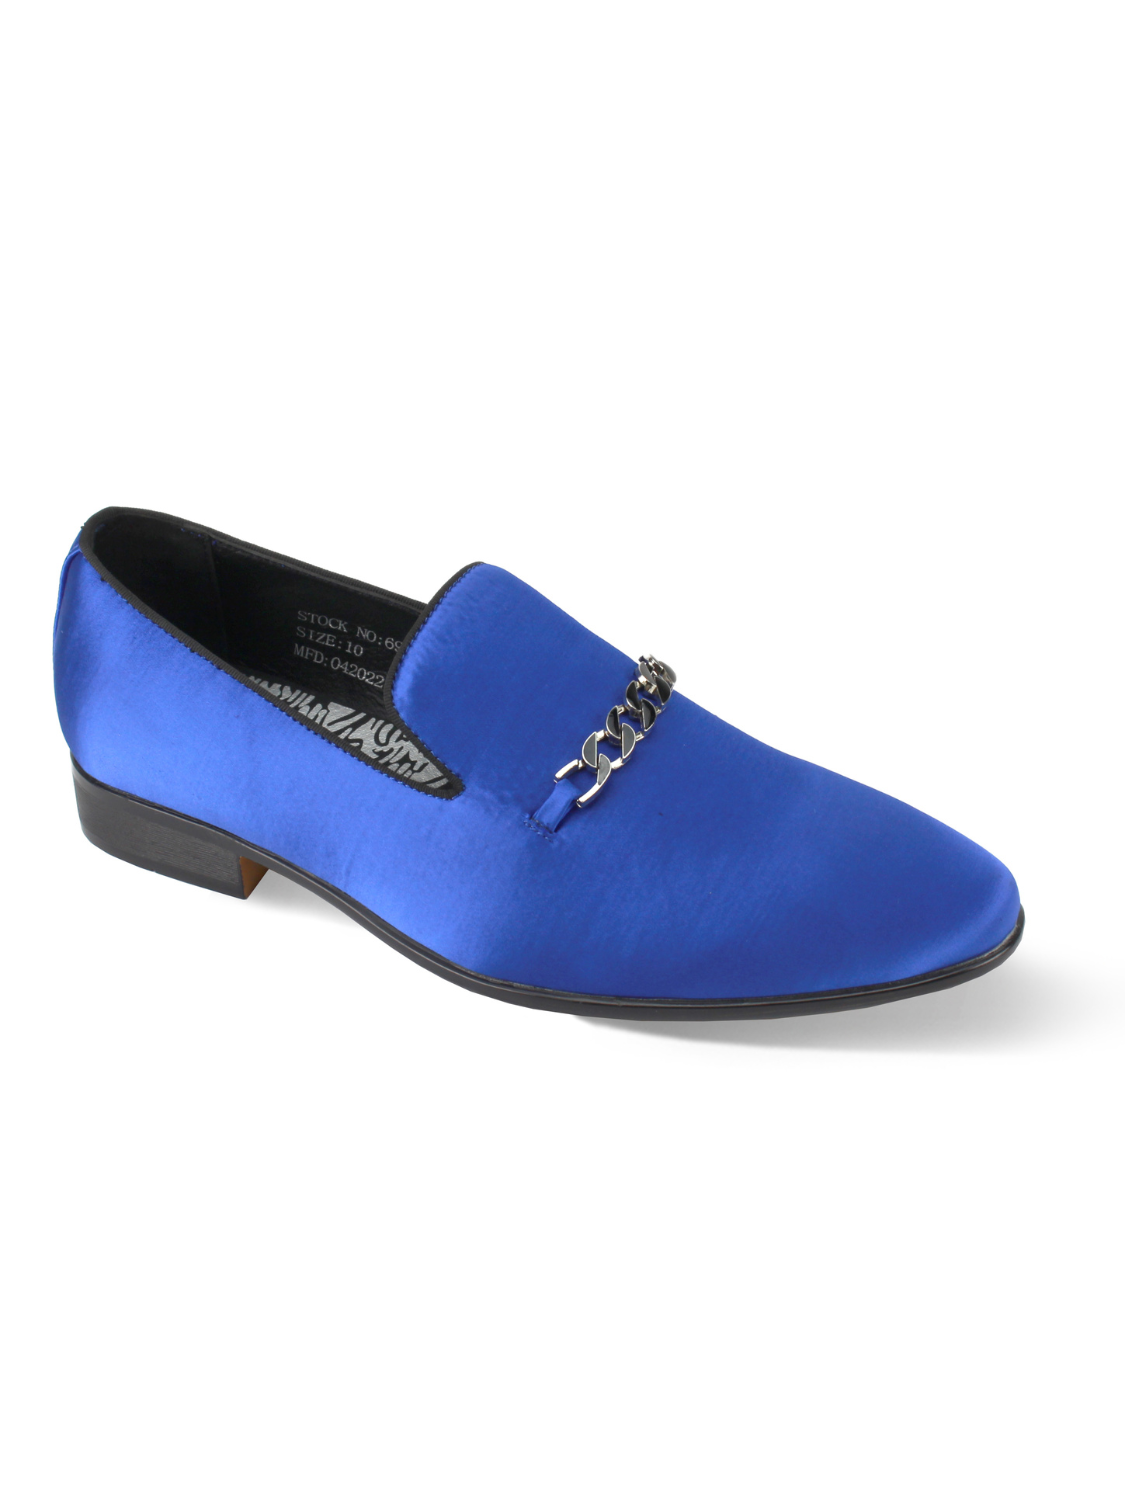 After Midnight Royal Satin Loafer